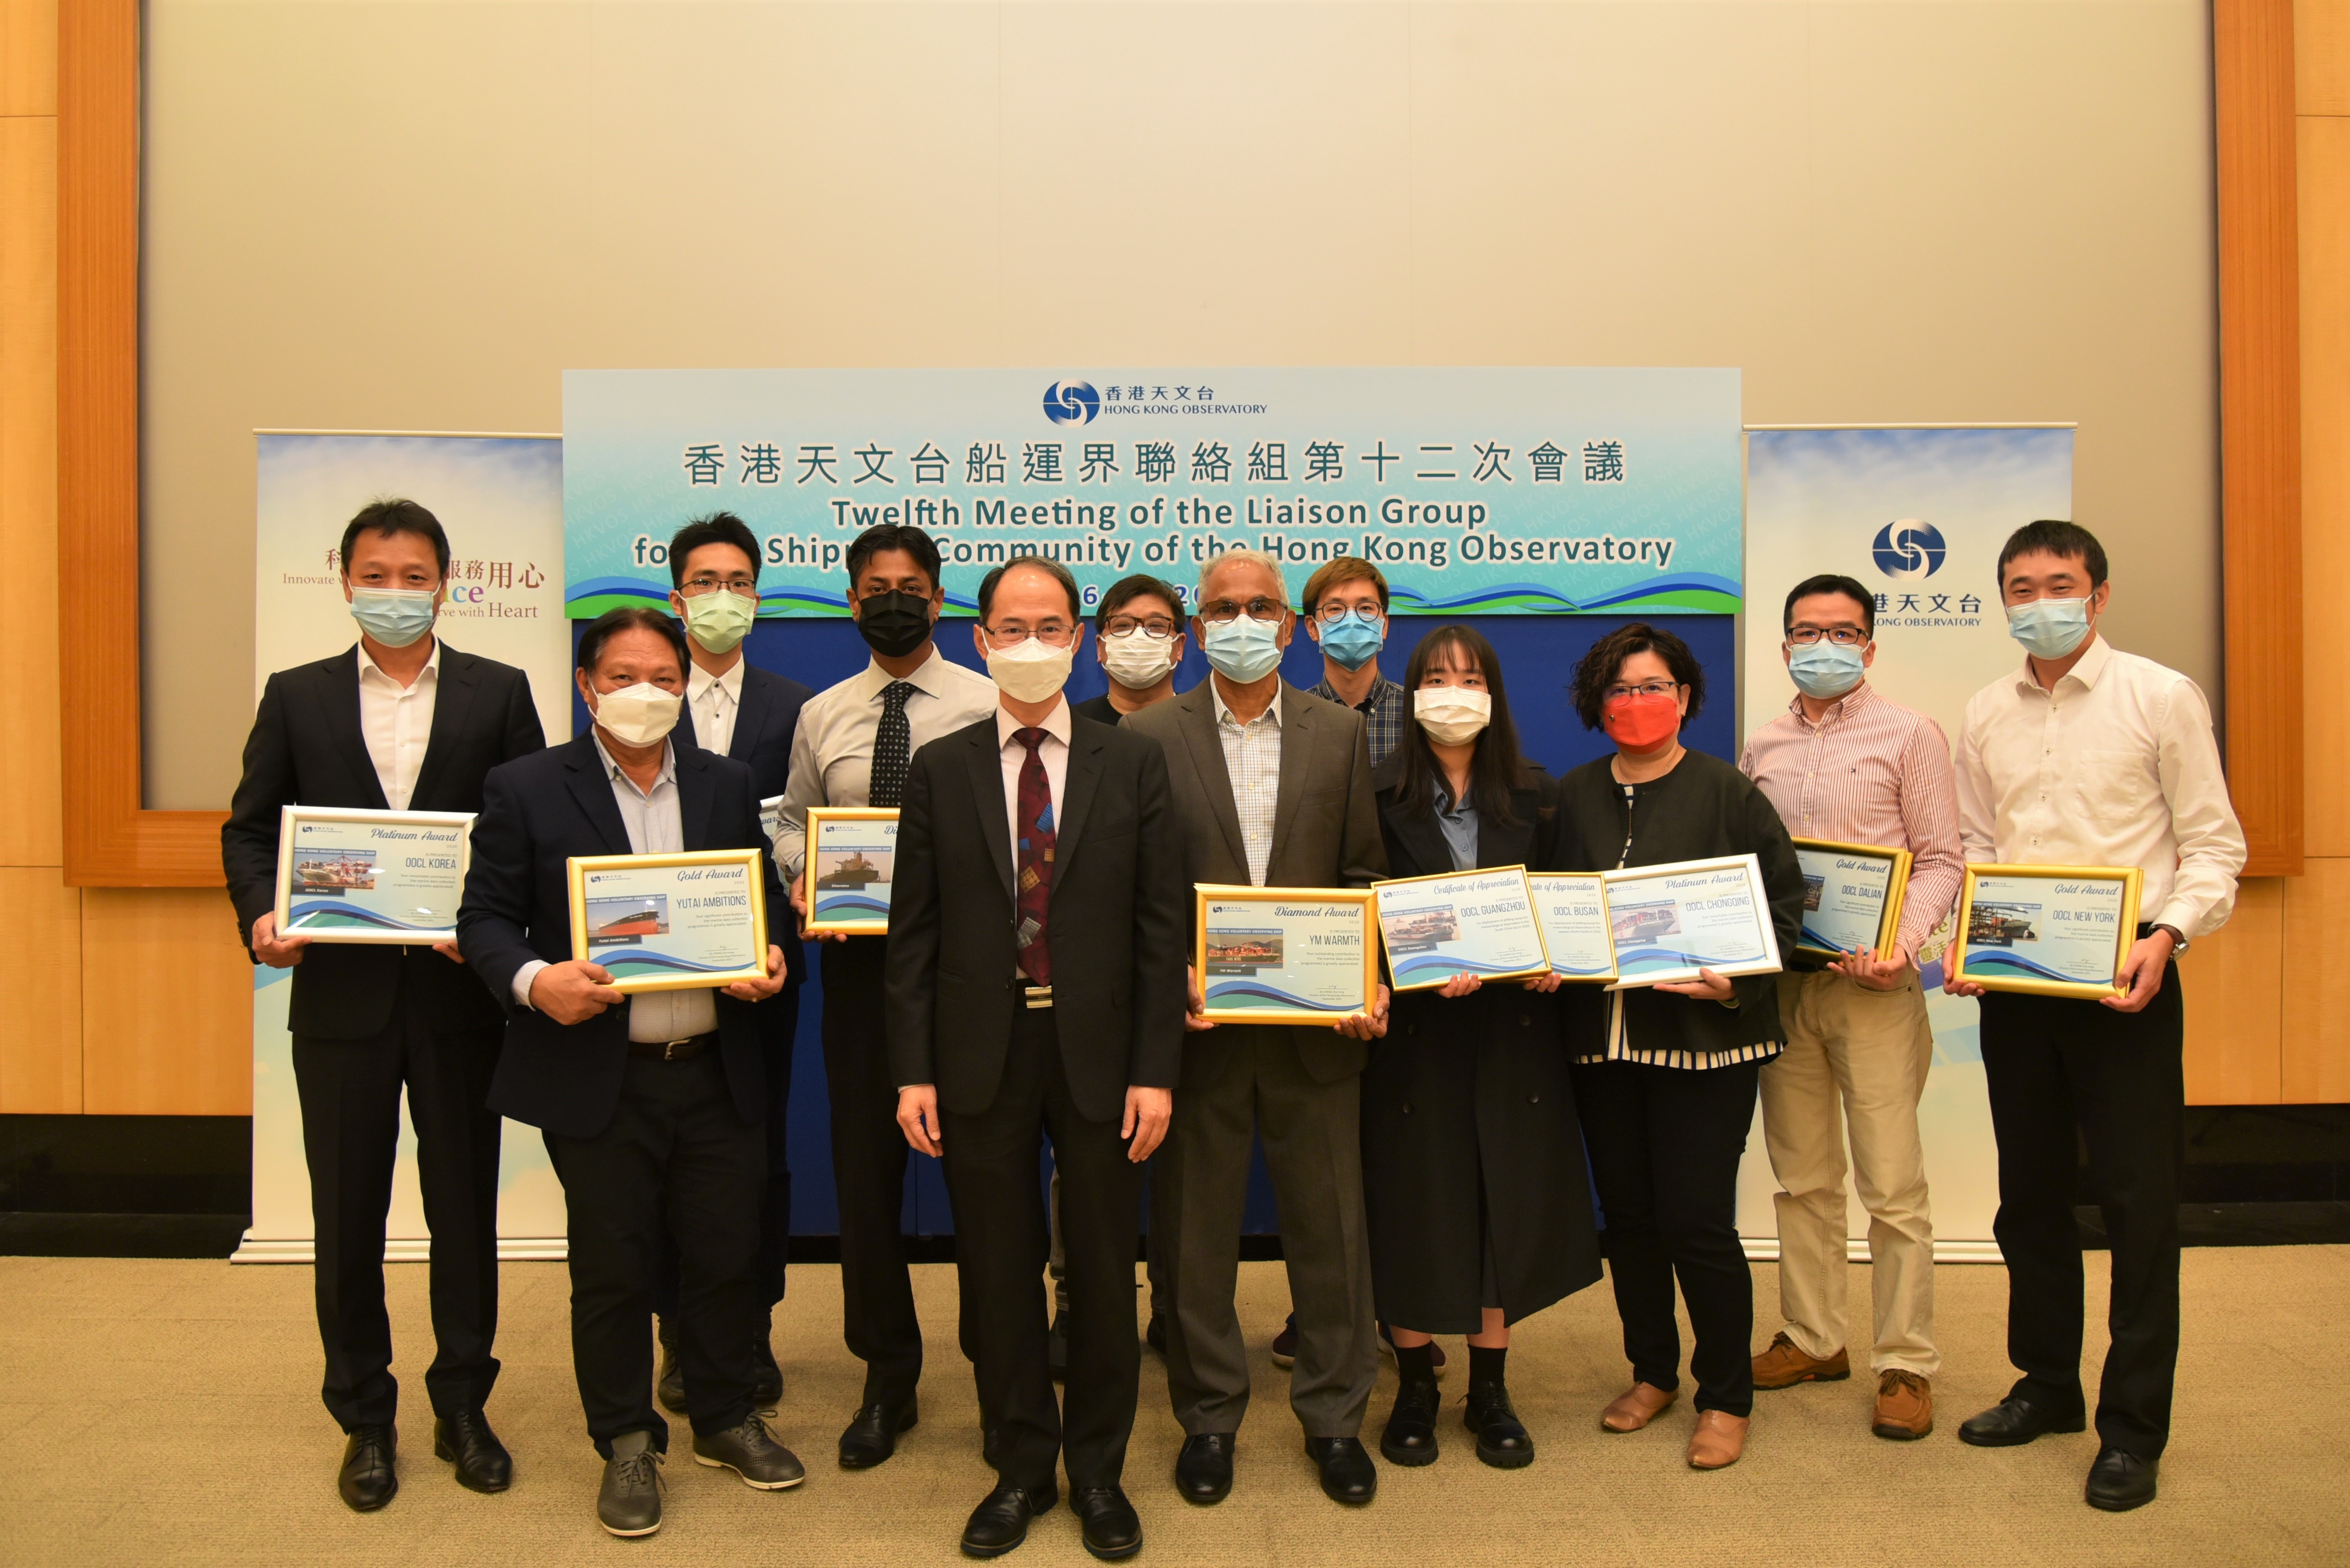 Dr. Cheng Cho-ming, Director of the Hong Kong Observatory (fifth from left), presenting awards to the outstanding voluntary observing ships in 2020